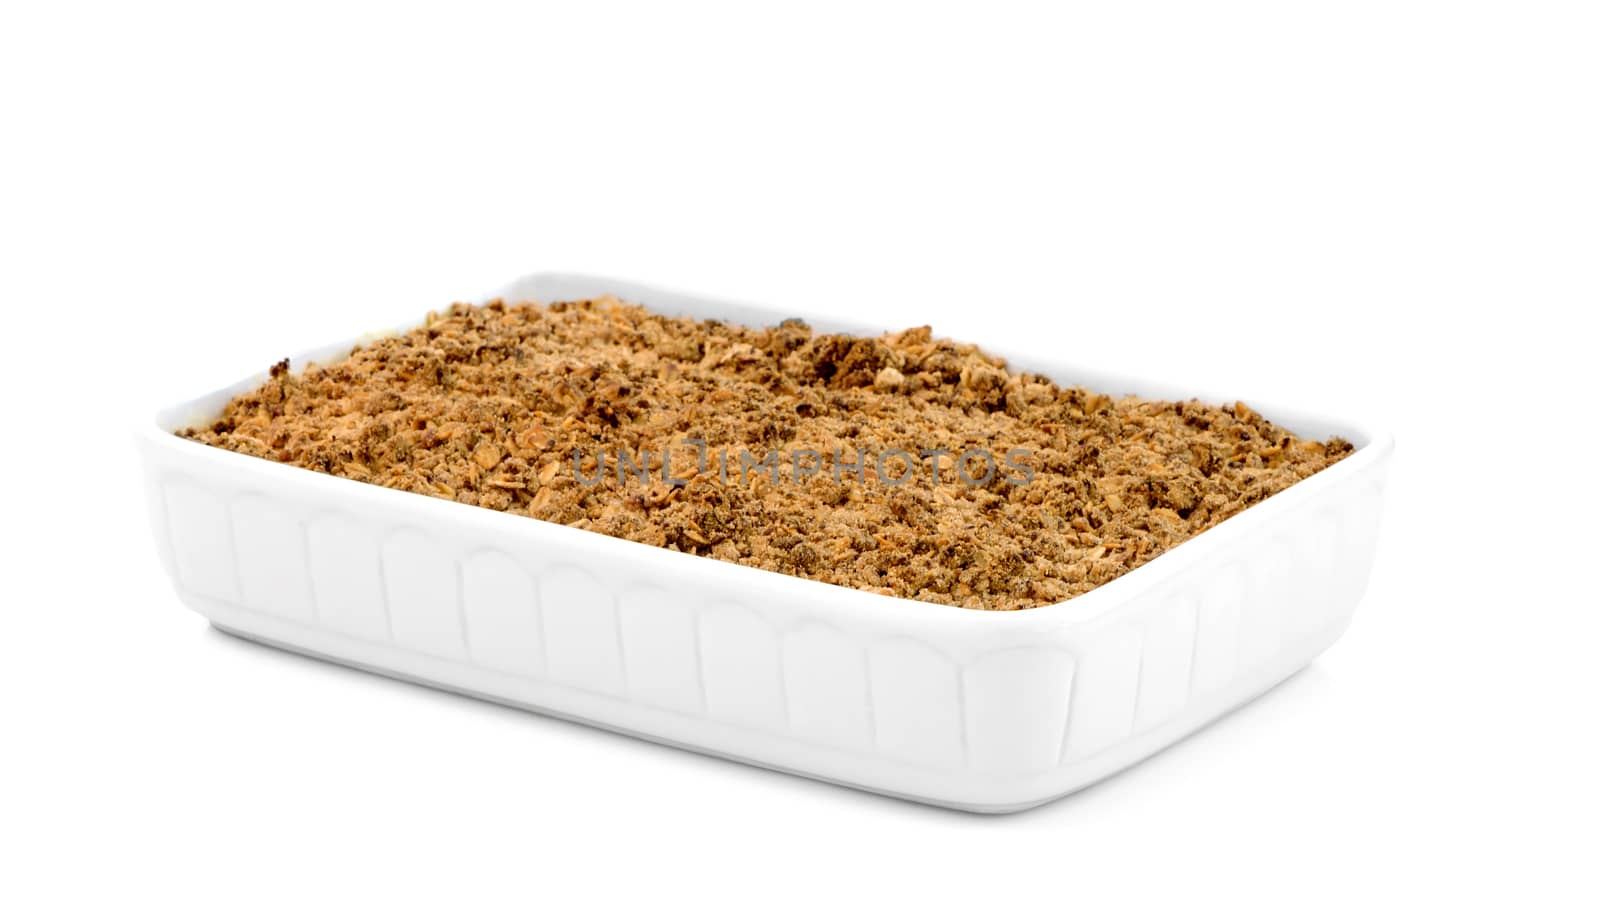 Apple crumble in a white ceramic pan isolated on white background.